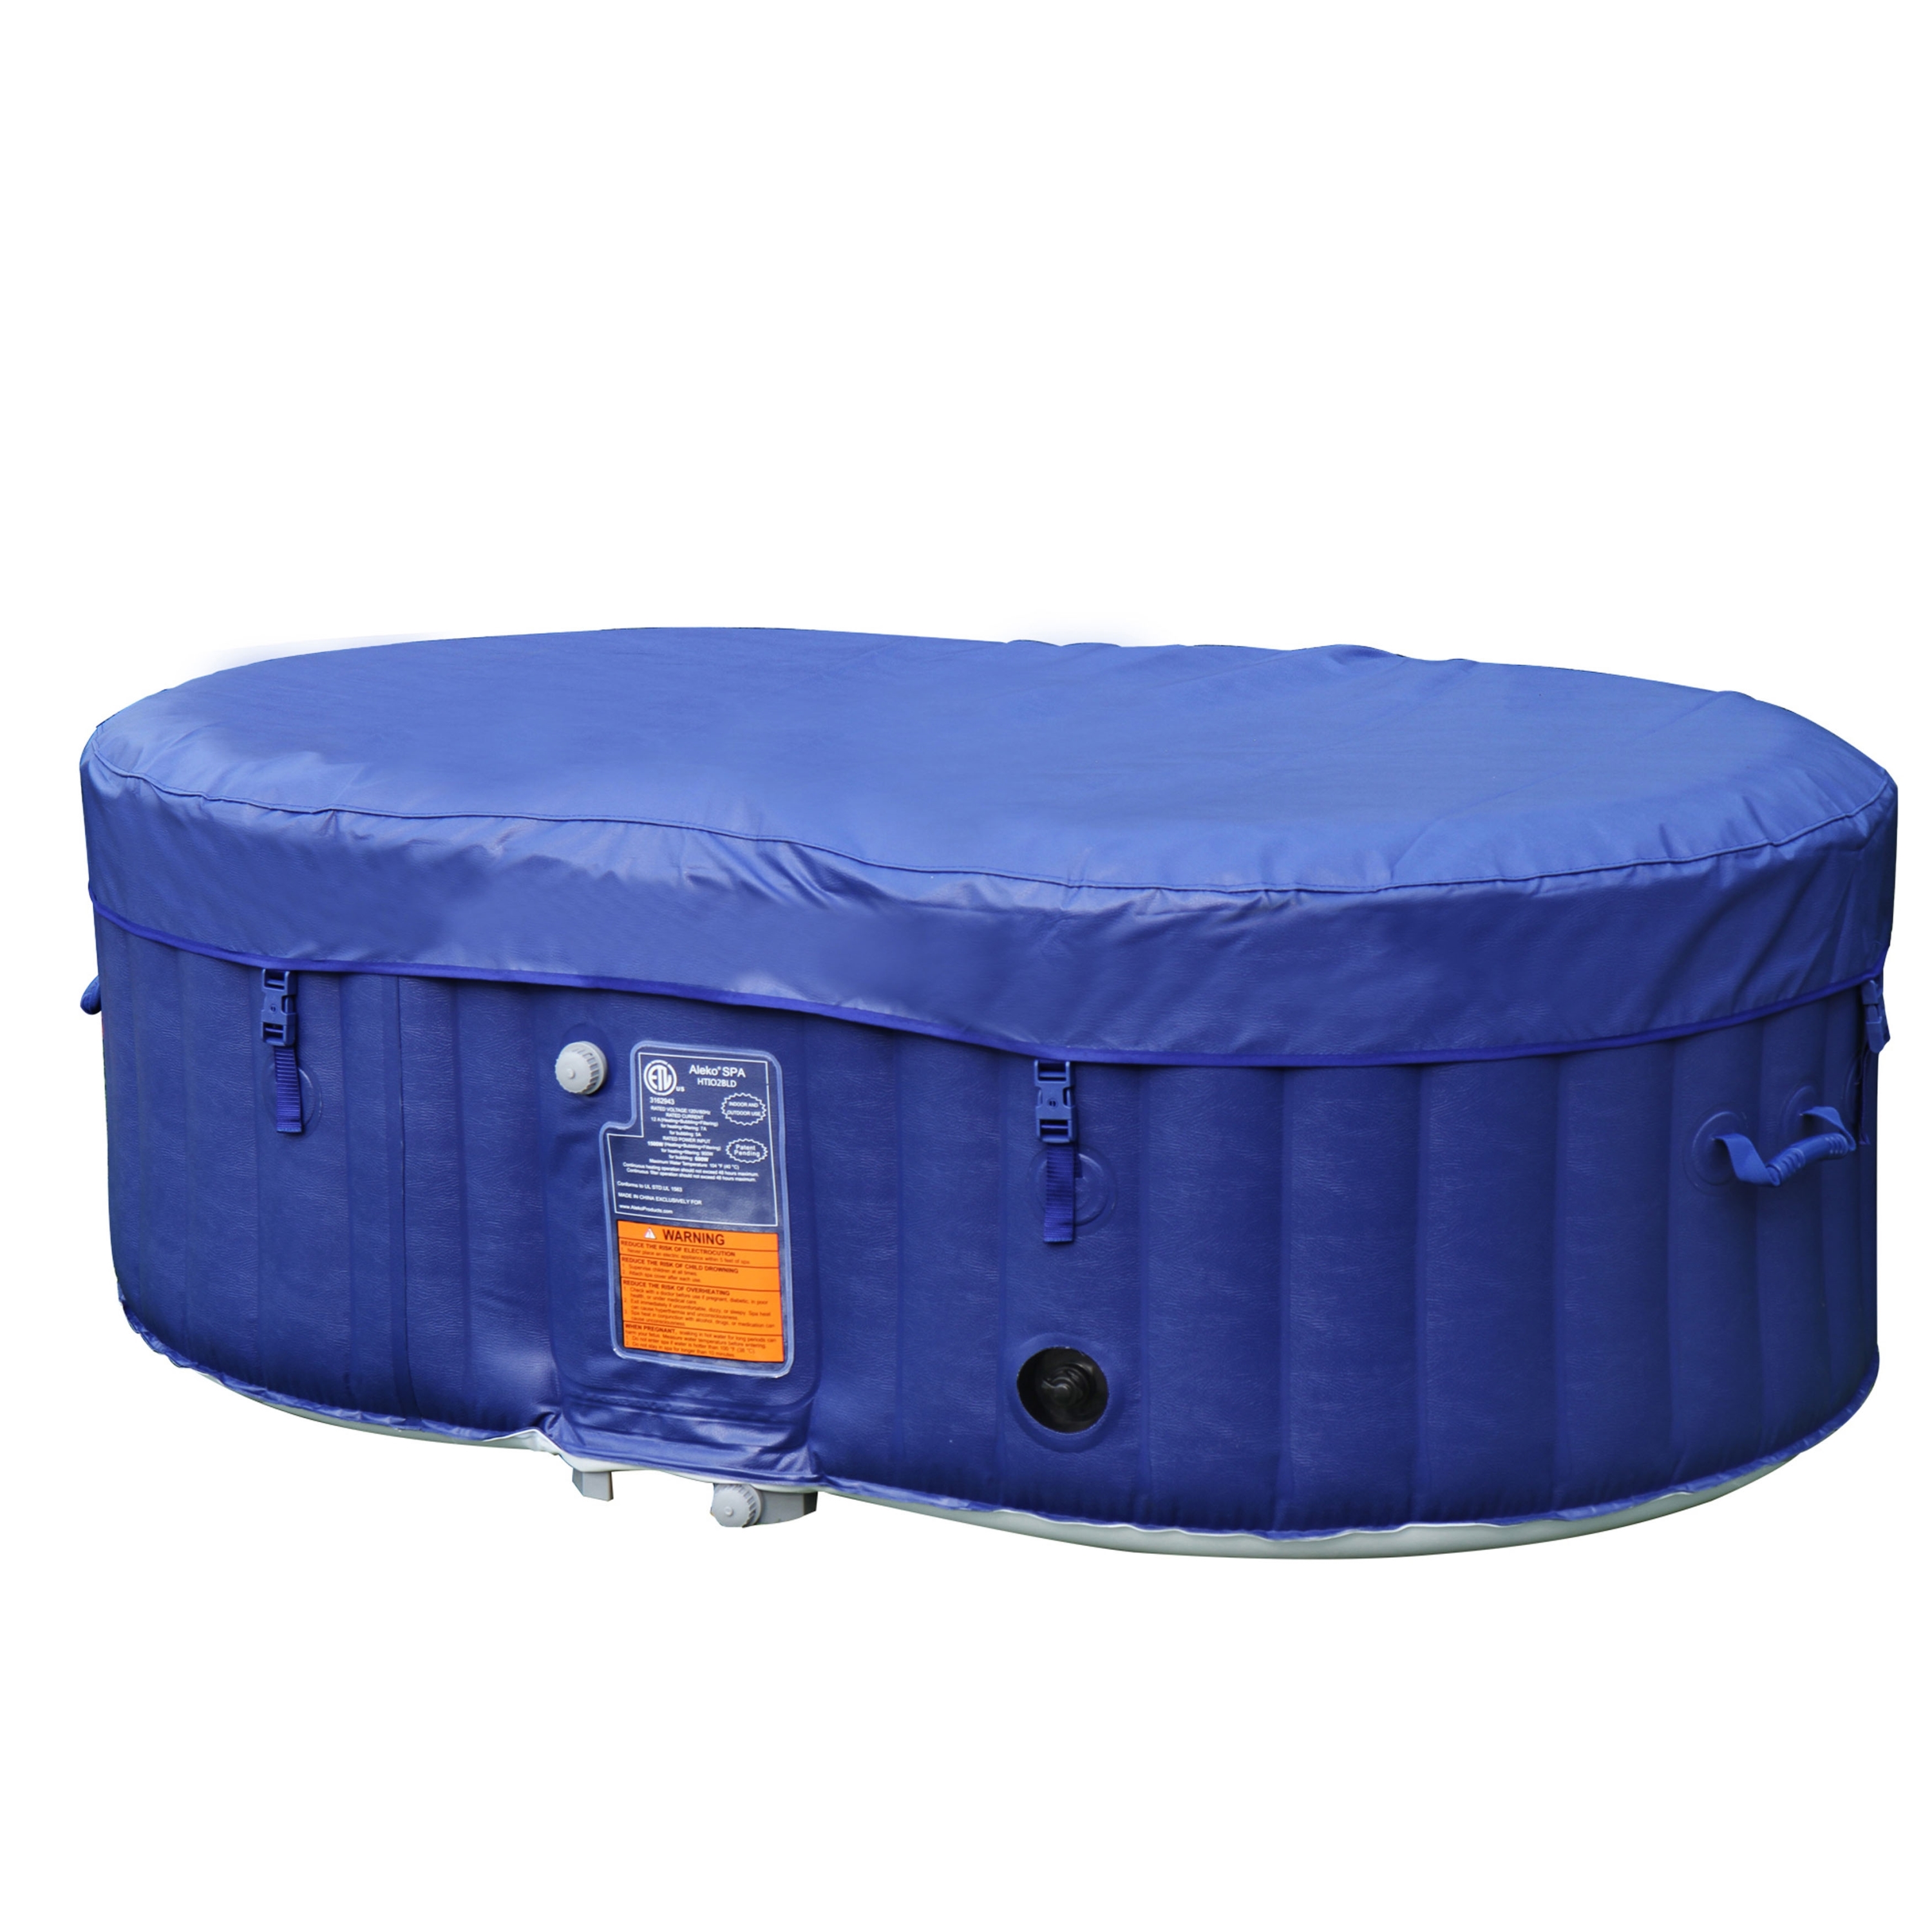 ALEKO Oval Inflatable Dark Blue 2 Person Hot Tub Spa with Drink Tray and Cover - image 3 of 14